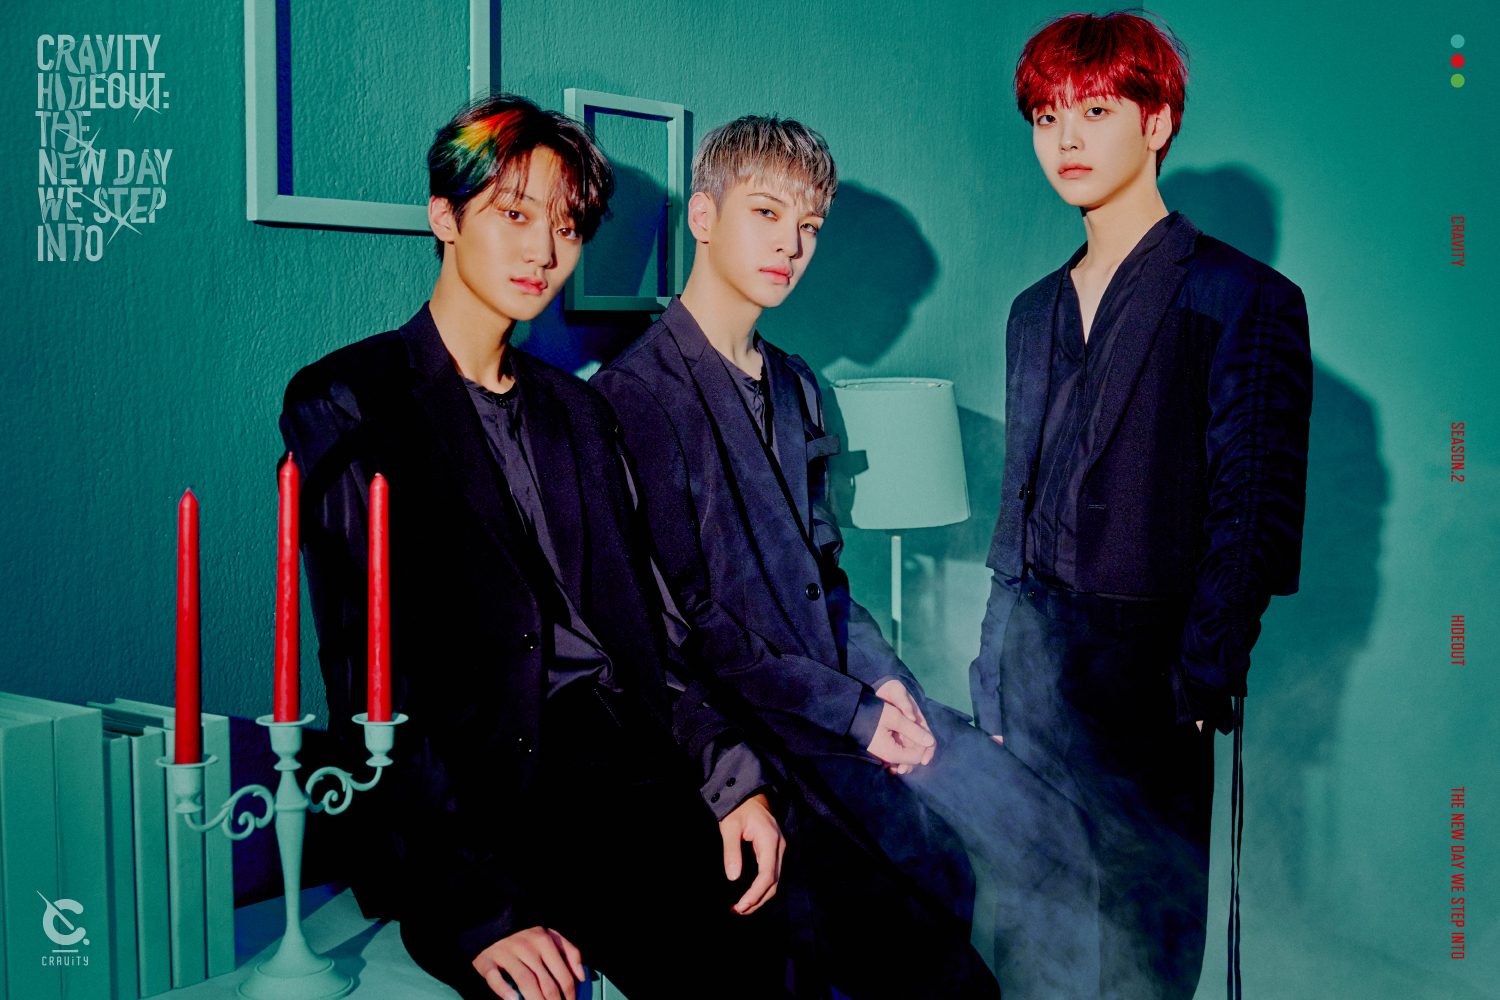 Group Cravity (CRAVITY) unveiled its concept photo ahead of the release of its new Mini album The New Balance Day Step Into at 6 p.m. on the 24th Days.Starship Entertainment (Starship) announced on the official SNS channel of Cravity at 9 pm on the 13th, Cravity Season 2.[HydeIn-N-Out Burger: The New Balance Day Step Into (CRAVITY SEASON2.[HIDEOUT: THE NEW DAY WE STEP INTO]], the first group and unit concept photo were posted sequentially, making the comeback heat even hotter.Cravity in the public photo is posing with chic eyes as if it is casually dressed in all black and navy color suits for each personality in a subtle fog based on the background of the turquoise color.The addition of charisma to the charm of each mature Cravity individual focuses attention on the comeback by itself, raising the curiosity of fans about this activity concept.Meanwhile, Cravity (Serim, Edgar Allan Poe, Chungmo, Woobin, Wonjin, Minhee, Hyung Joon, Taeyoung, and Sungmin) proved to be a super rookie by winning the Shinhan Ryu Soribada Rookie Award at the 2020 Soribada Awards held on the 13th. -N-Out Burger: The New Balance Day Step Into (CRAVITY HIDEOUT: THE NEW DAY WE STEP INTO) will be released, and the trend will continue with the title song Plame.iMBC  Photo Starship